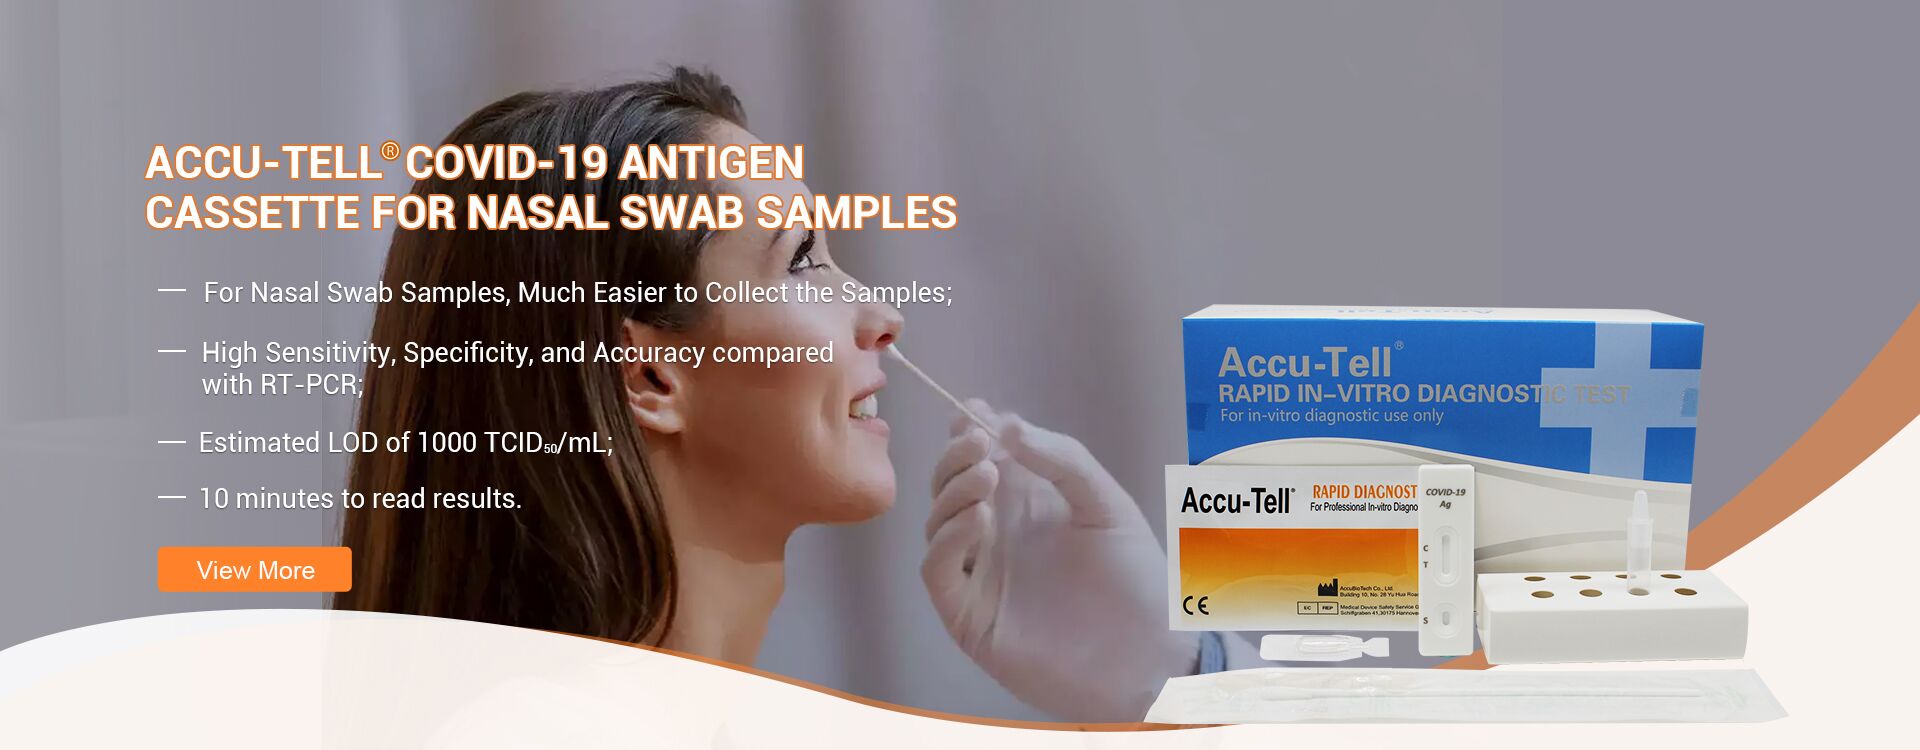 How Accurate is a Covid-19 Antigen Test